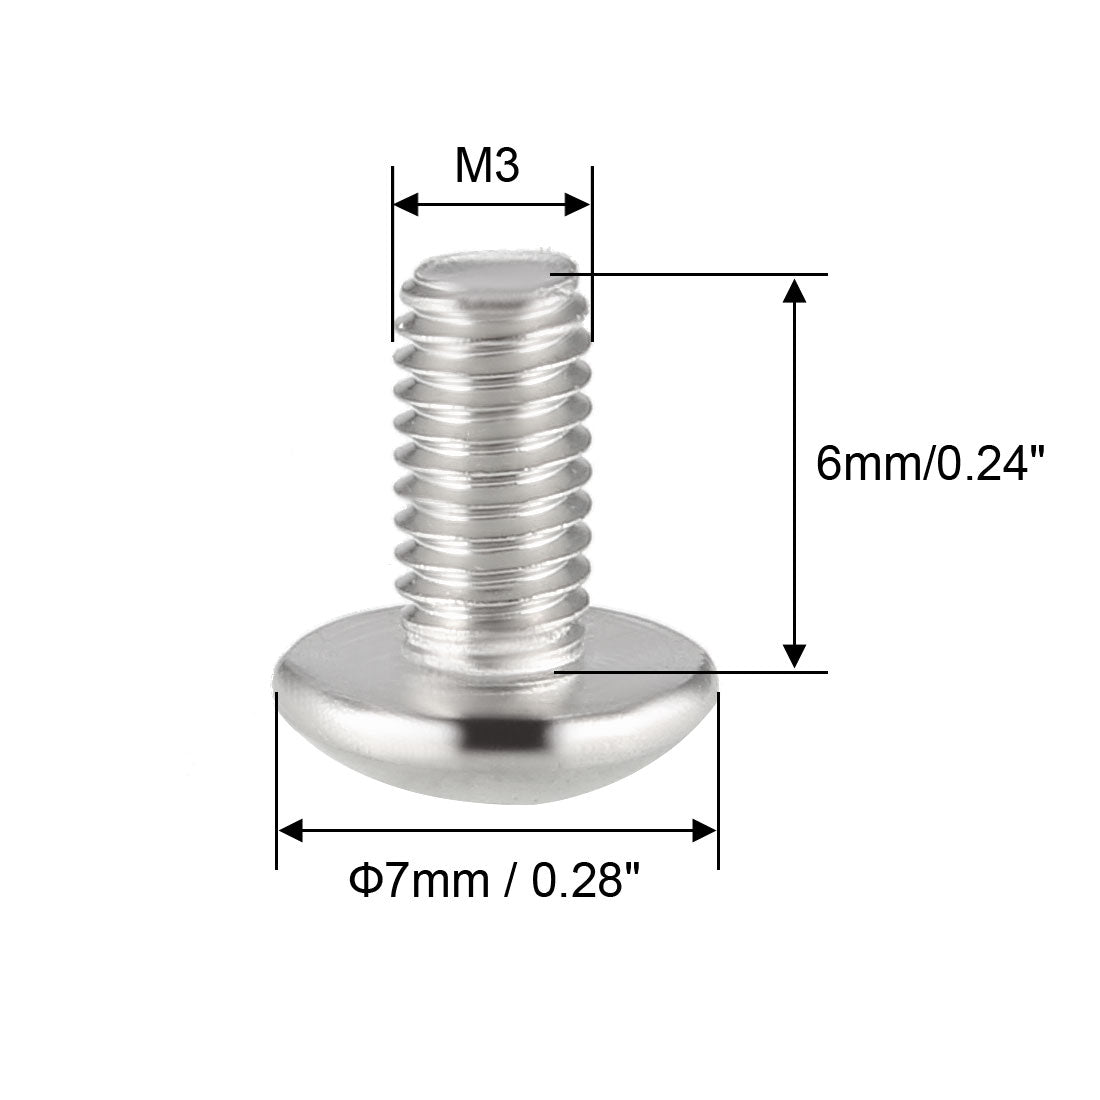 Uxcell Uxcell Machine Screws, M2.5x10mm Phillips  Head Screw, 304 Stainless Steel, Fasteners Bolts 50Pcs